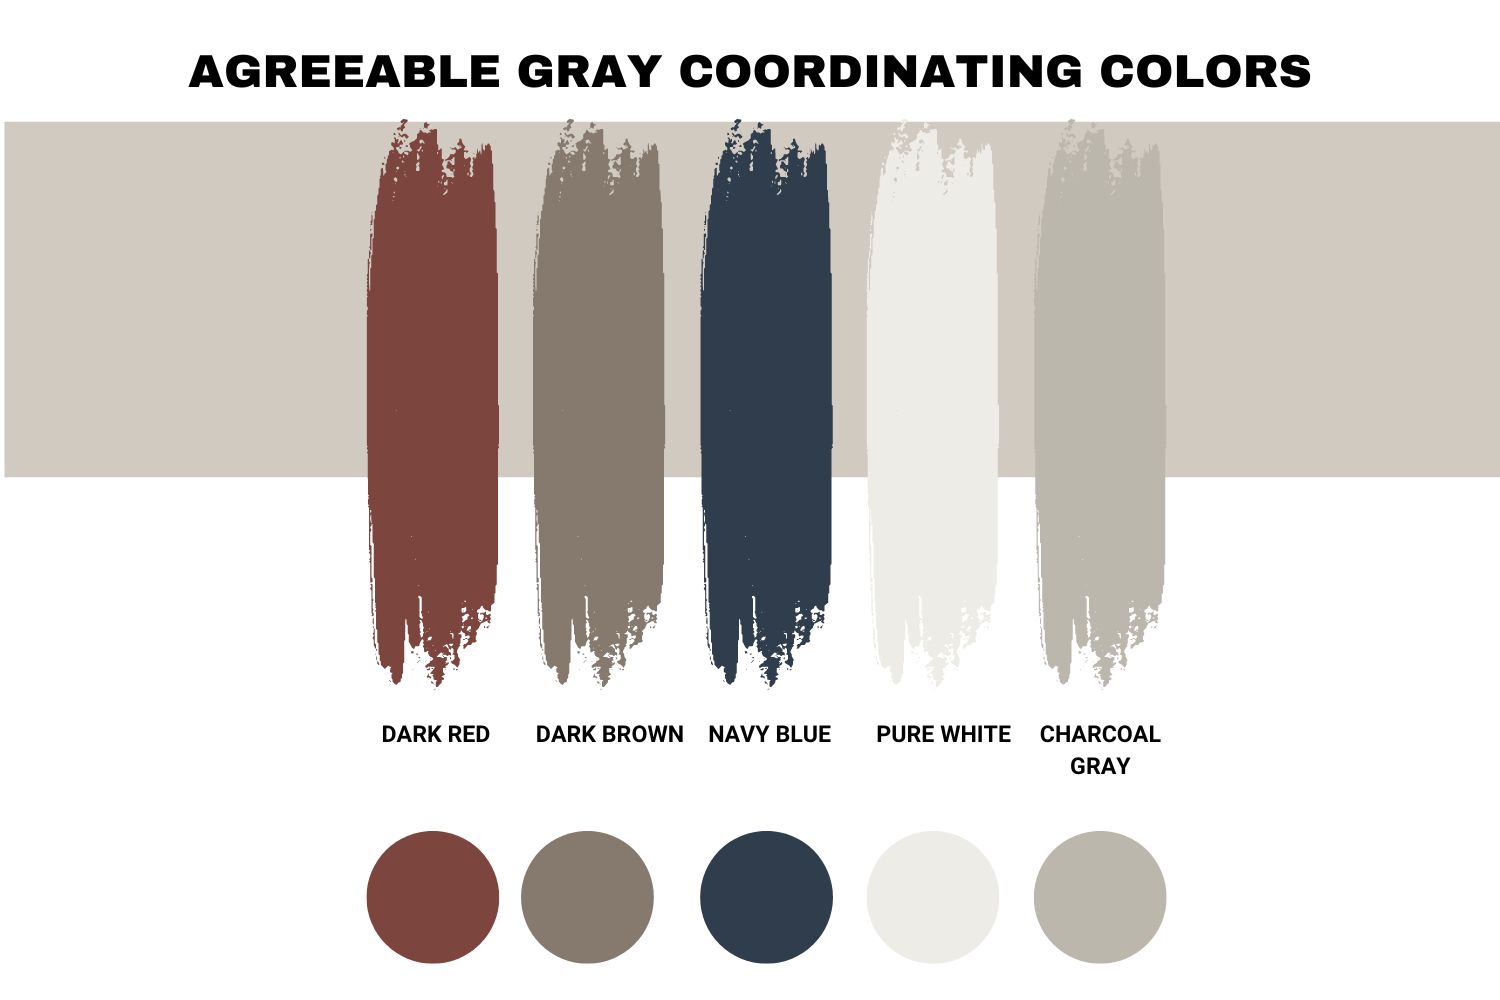 Worldly Gray Vs Agreeable Gray Coordinating Colors2